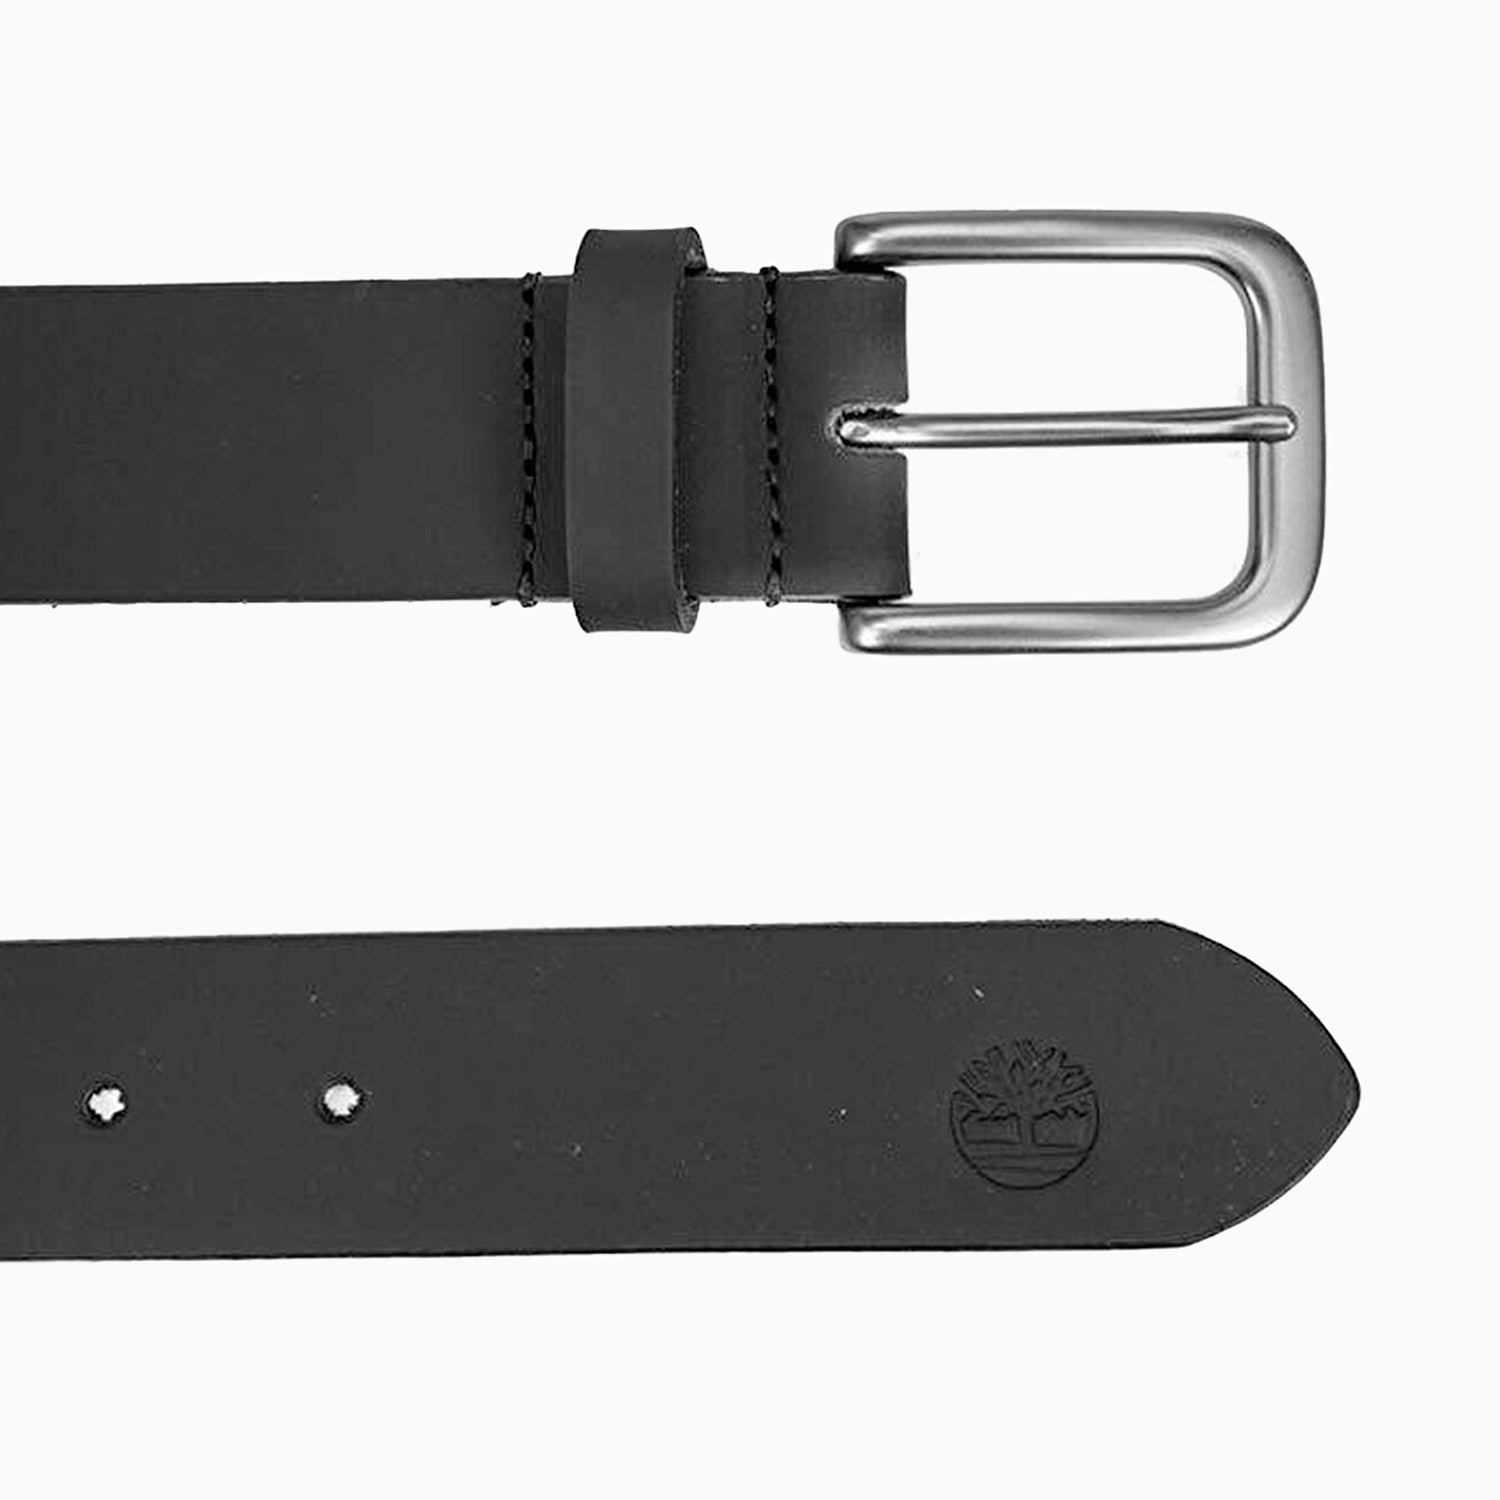 Timberland | Men's 35mm Classic Jean Urban Casual Genuine Leather Belt - Color: BLACK, NAVY BLUE - Tops and Bottoms USA -